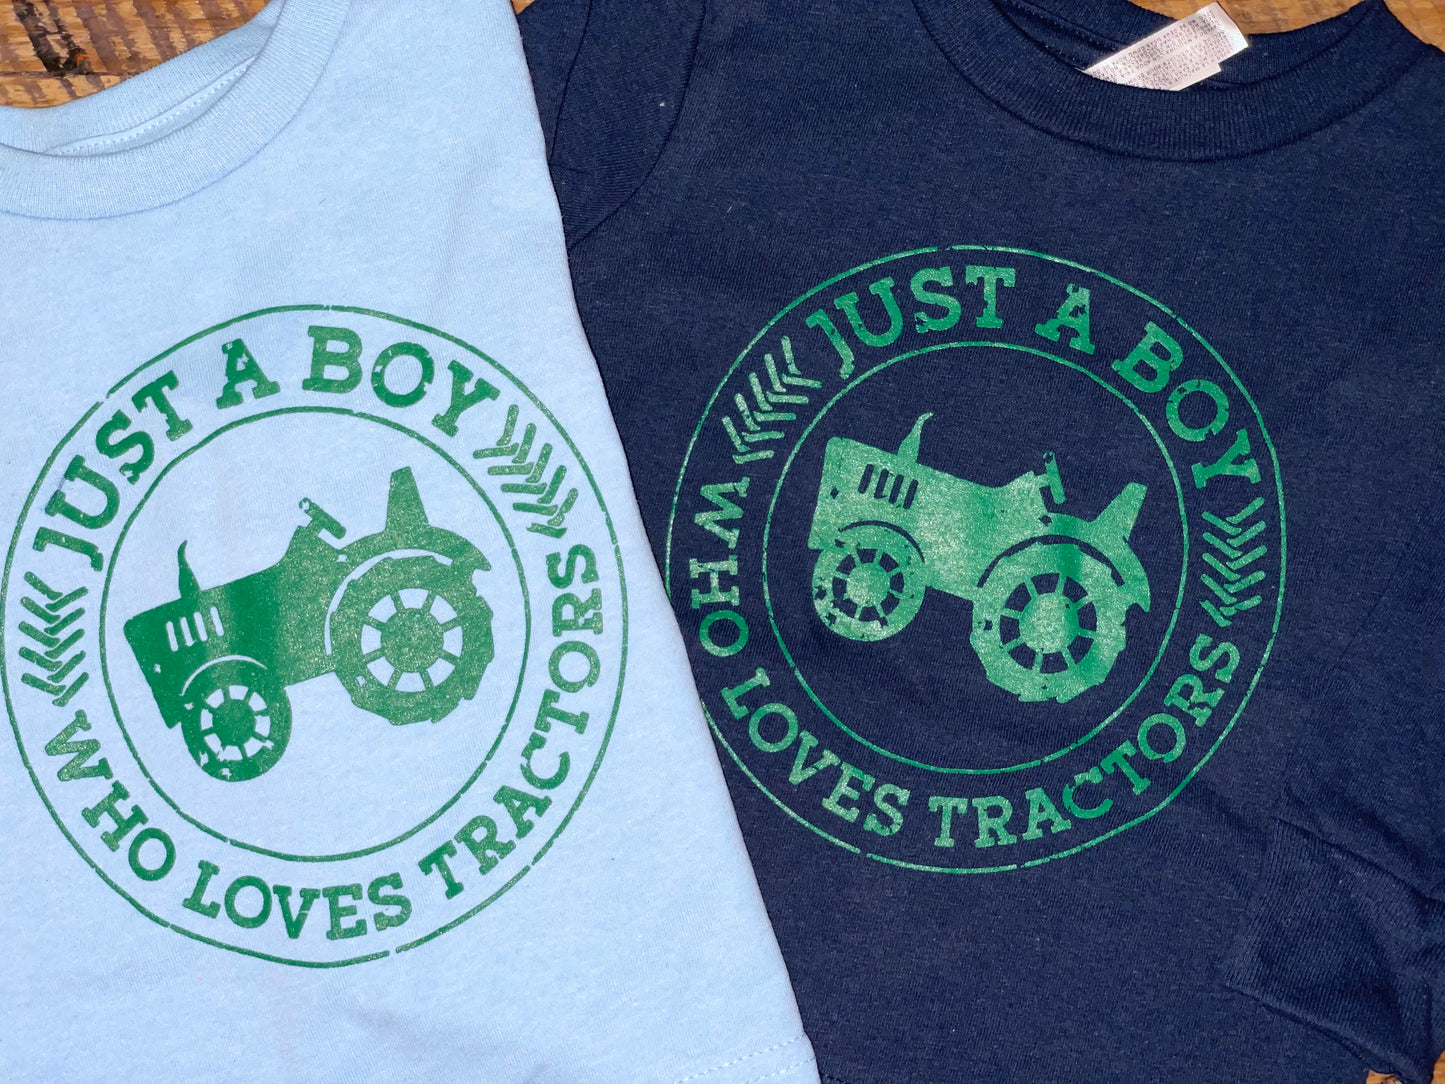 Just a boy who loves tractors screen print tee shirt for baby boys, toddler boys, and big kids, light blue and navy with green 